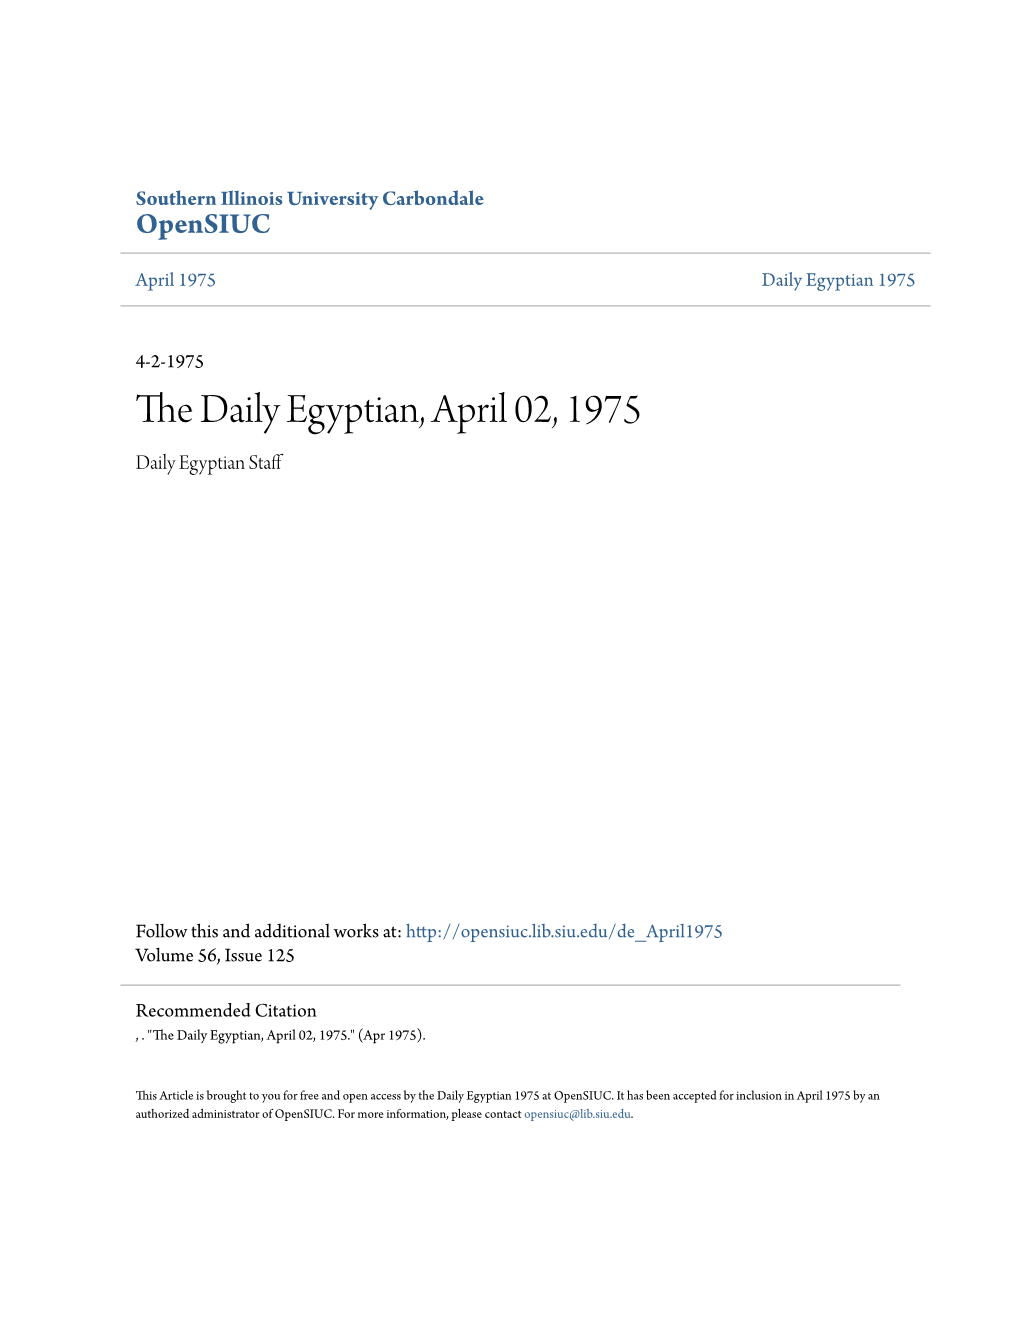 The Daily Egyptian, April 02, 1975